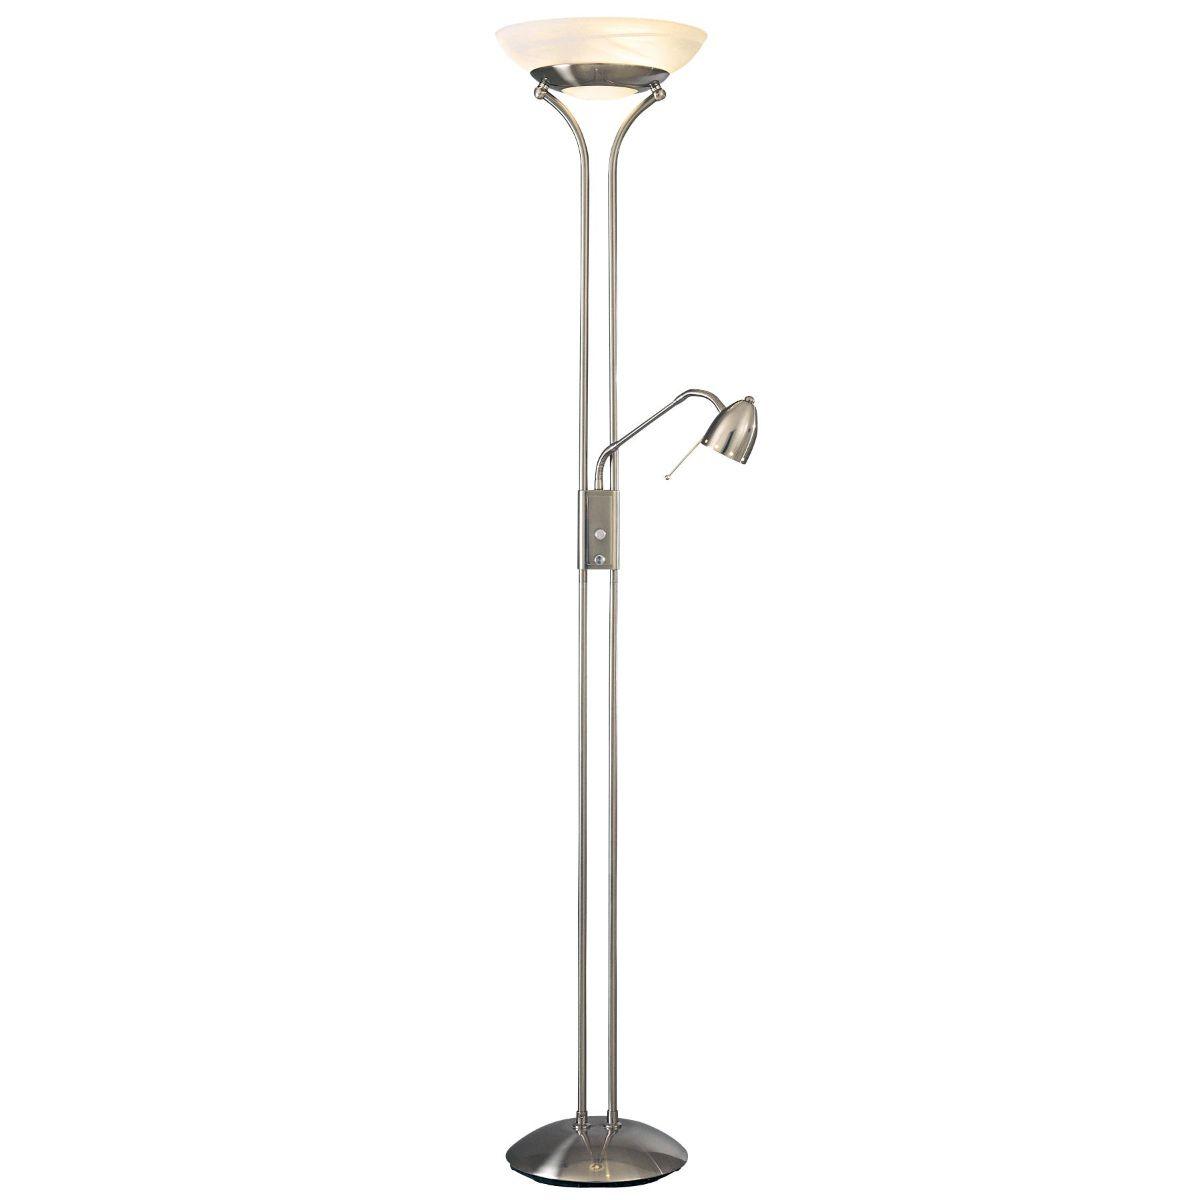 George's Reading Room 2 Lights Torchiere Floor Lamp with Reading Lamp Brushed Nickel Finish